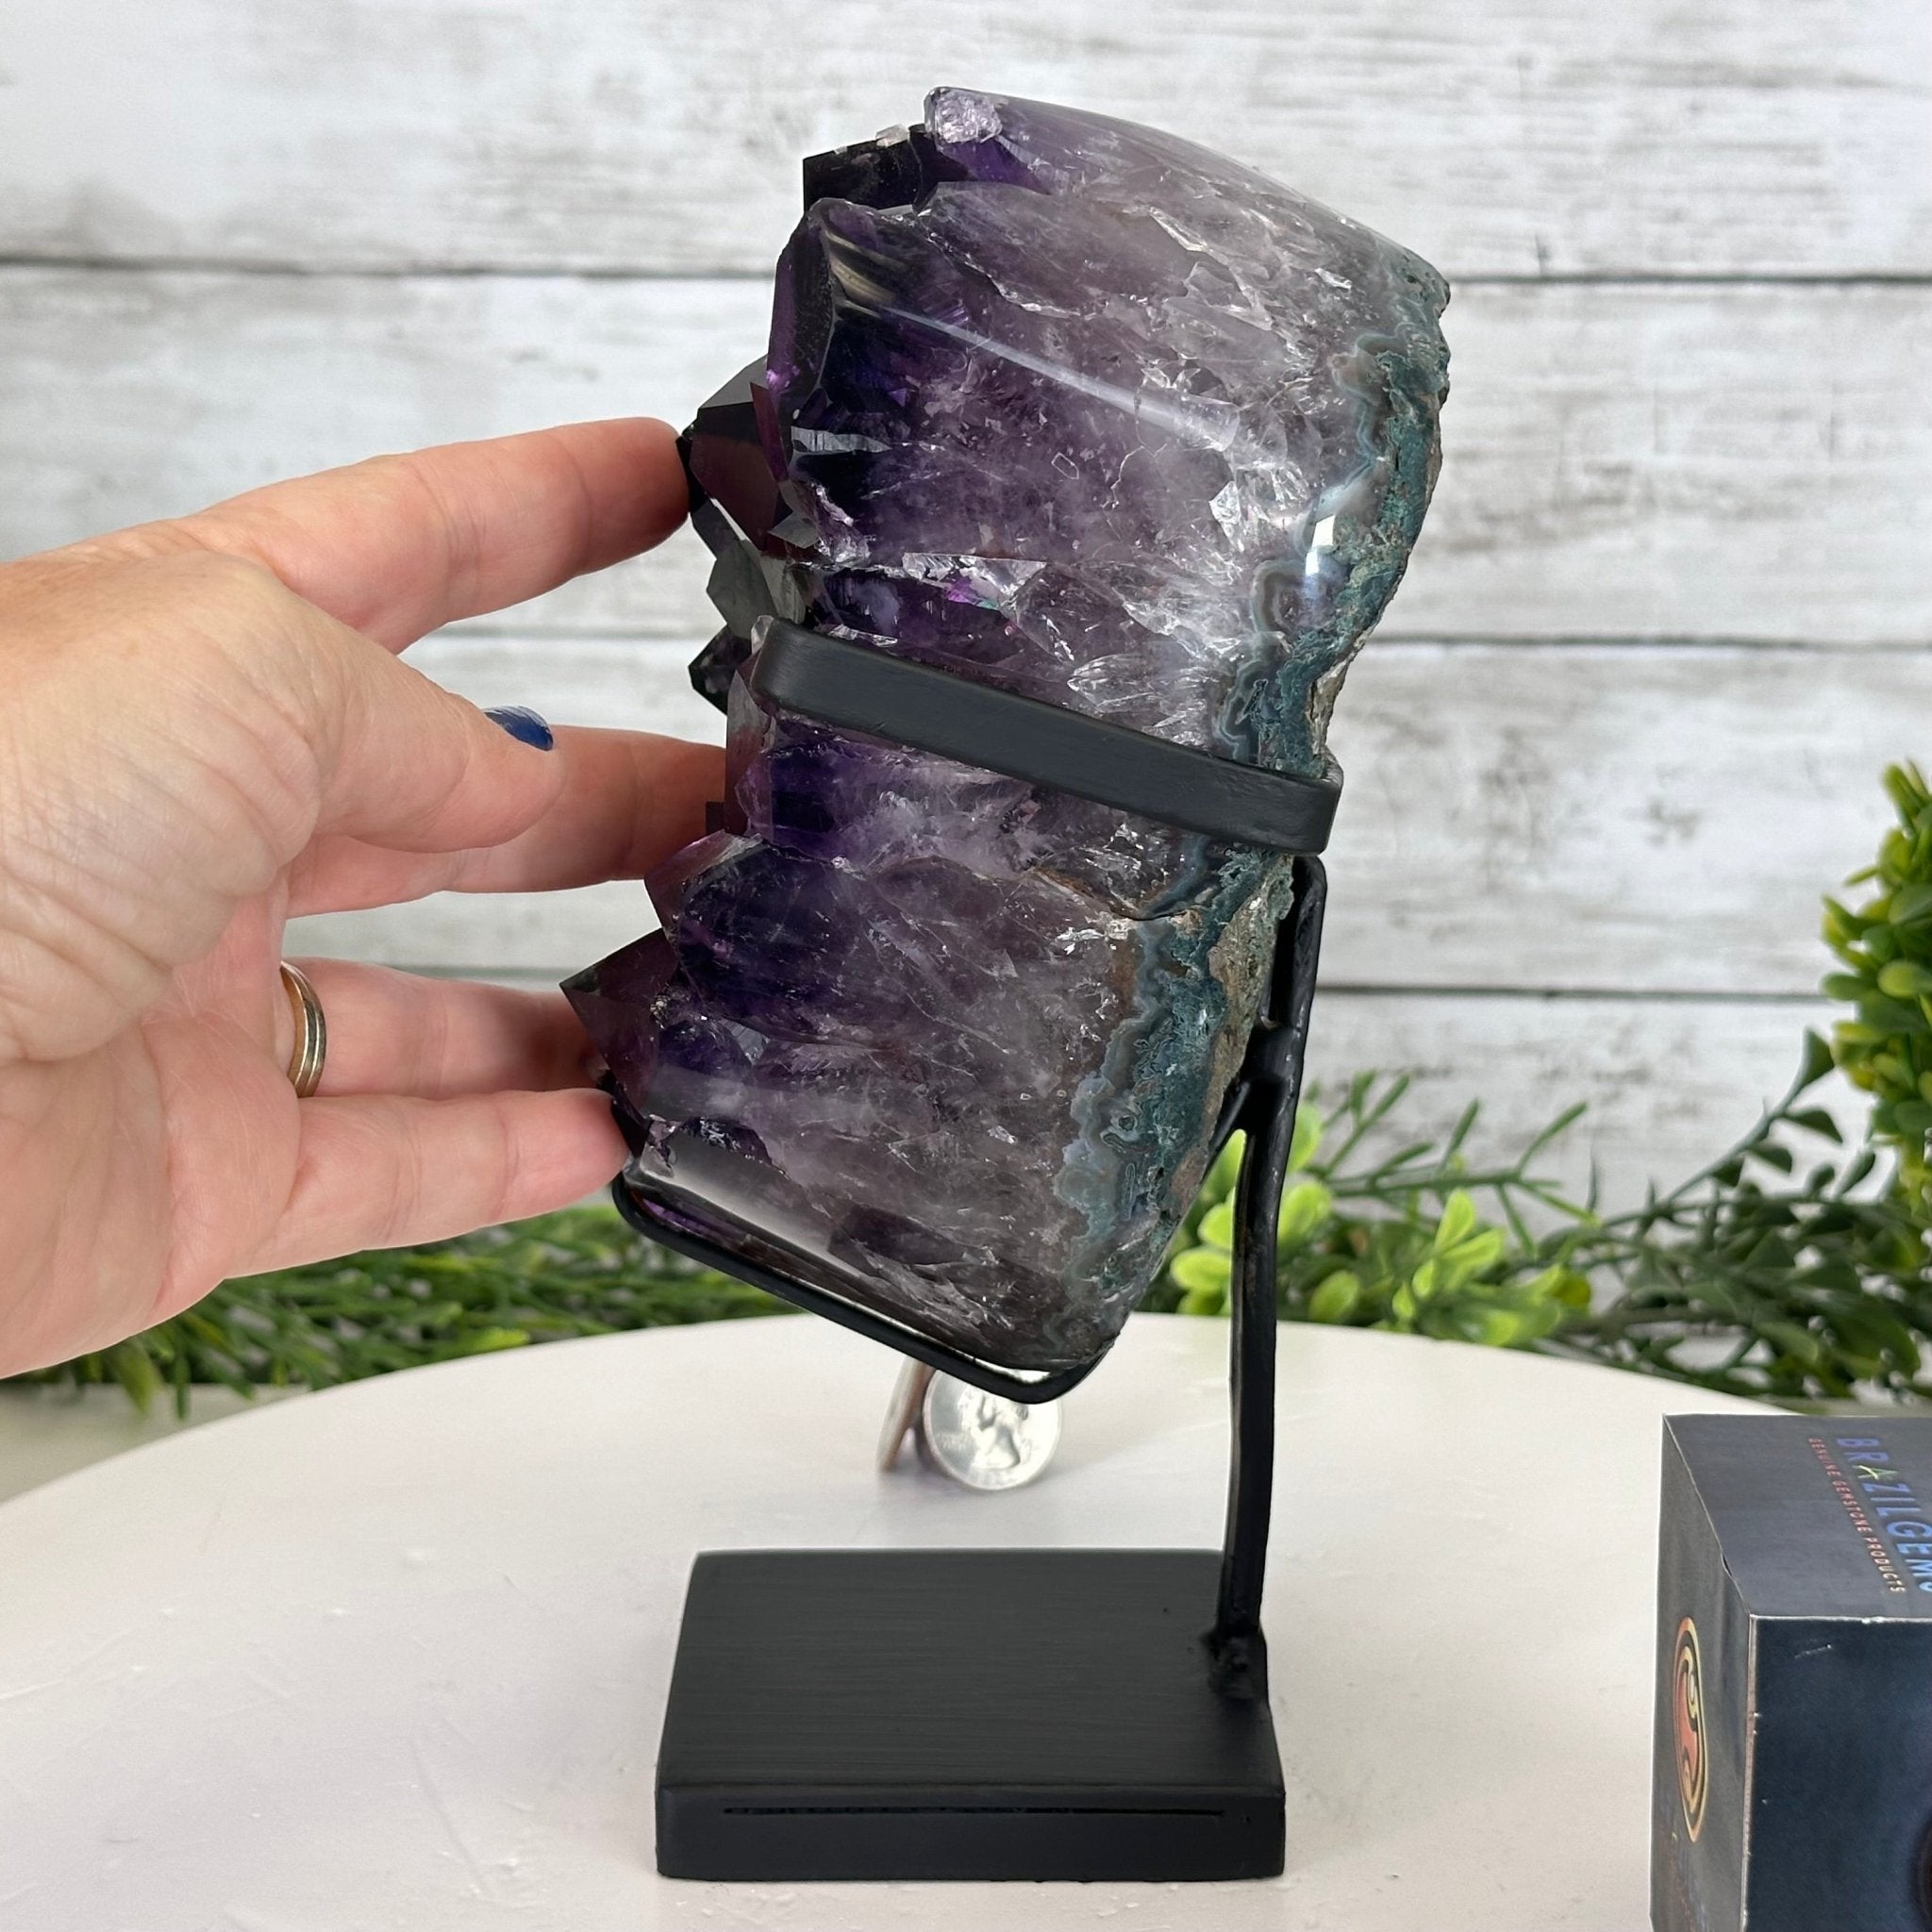 Super Quality Amethyst Cluster on a Metal Stand, 5.7 lbs & 8.5" Tall #5491-0154 - Brazil GemsBrazil GemsSuper Quality Amethyst Cluster on a Metal Stand, 5.7 lbs & 8.5" Tall #5491-0154Clusters on Fixed Bases5491-0154